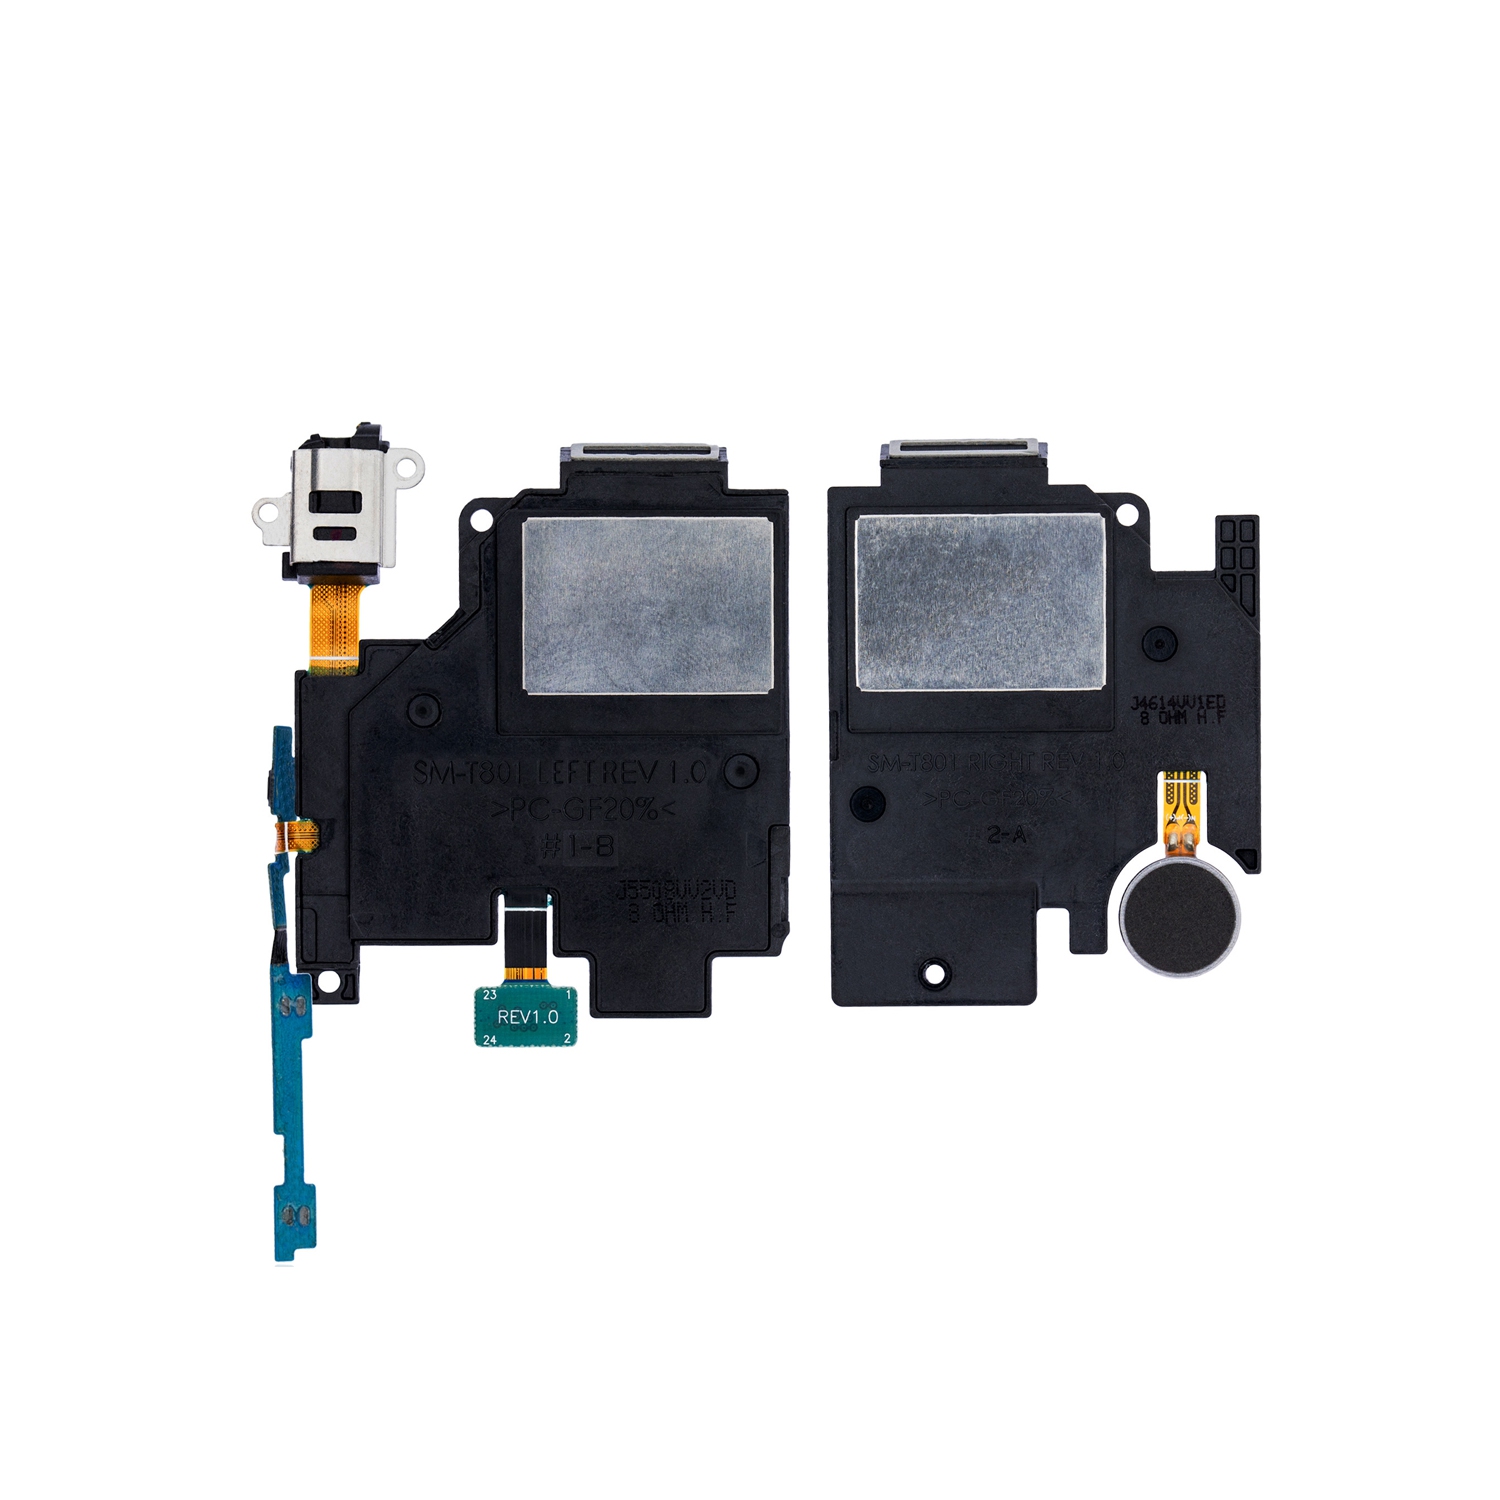 Replacement Loudspeaker With Headphone Jack + Power/Volume Flex For Samsung Galaxy Tab S 10.5" T800/T805 (2 Pieces)